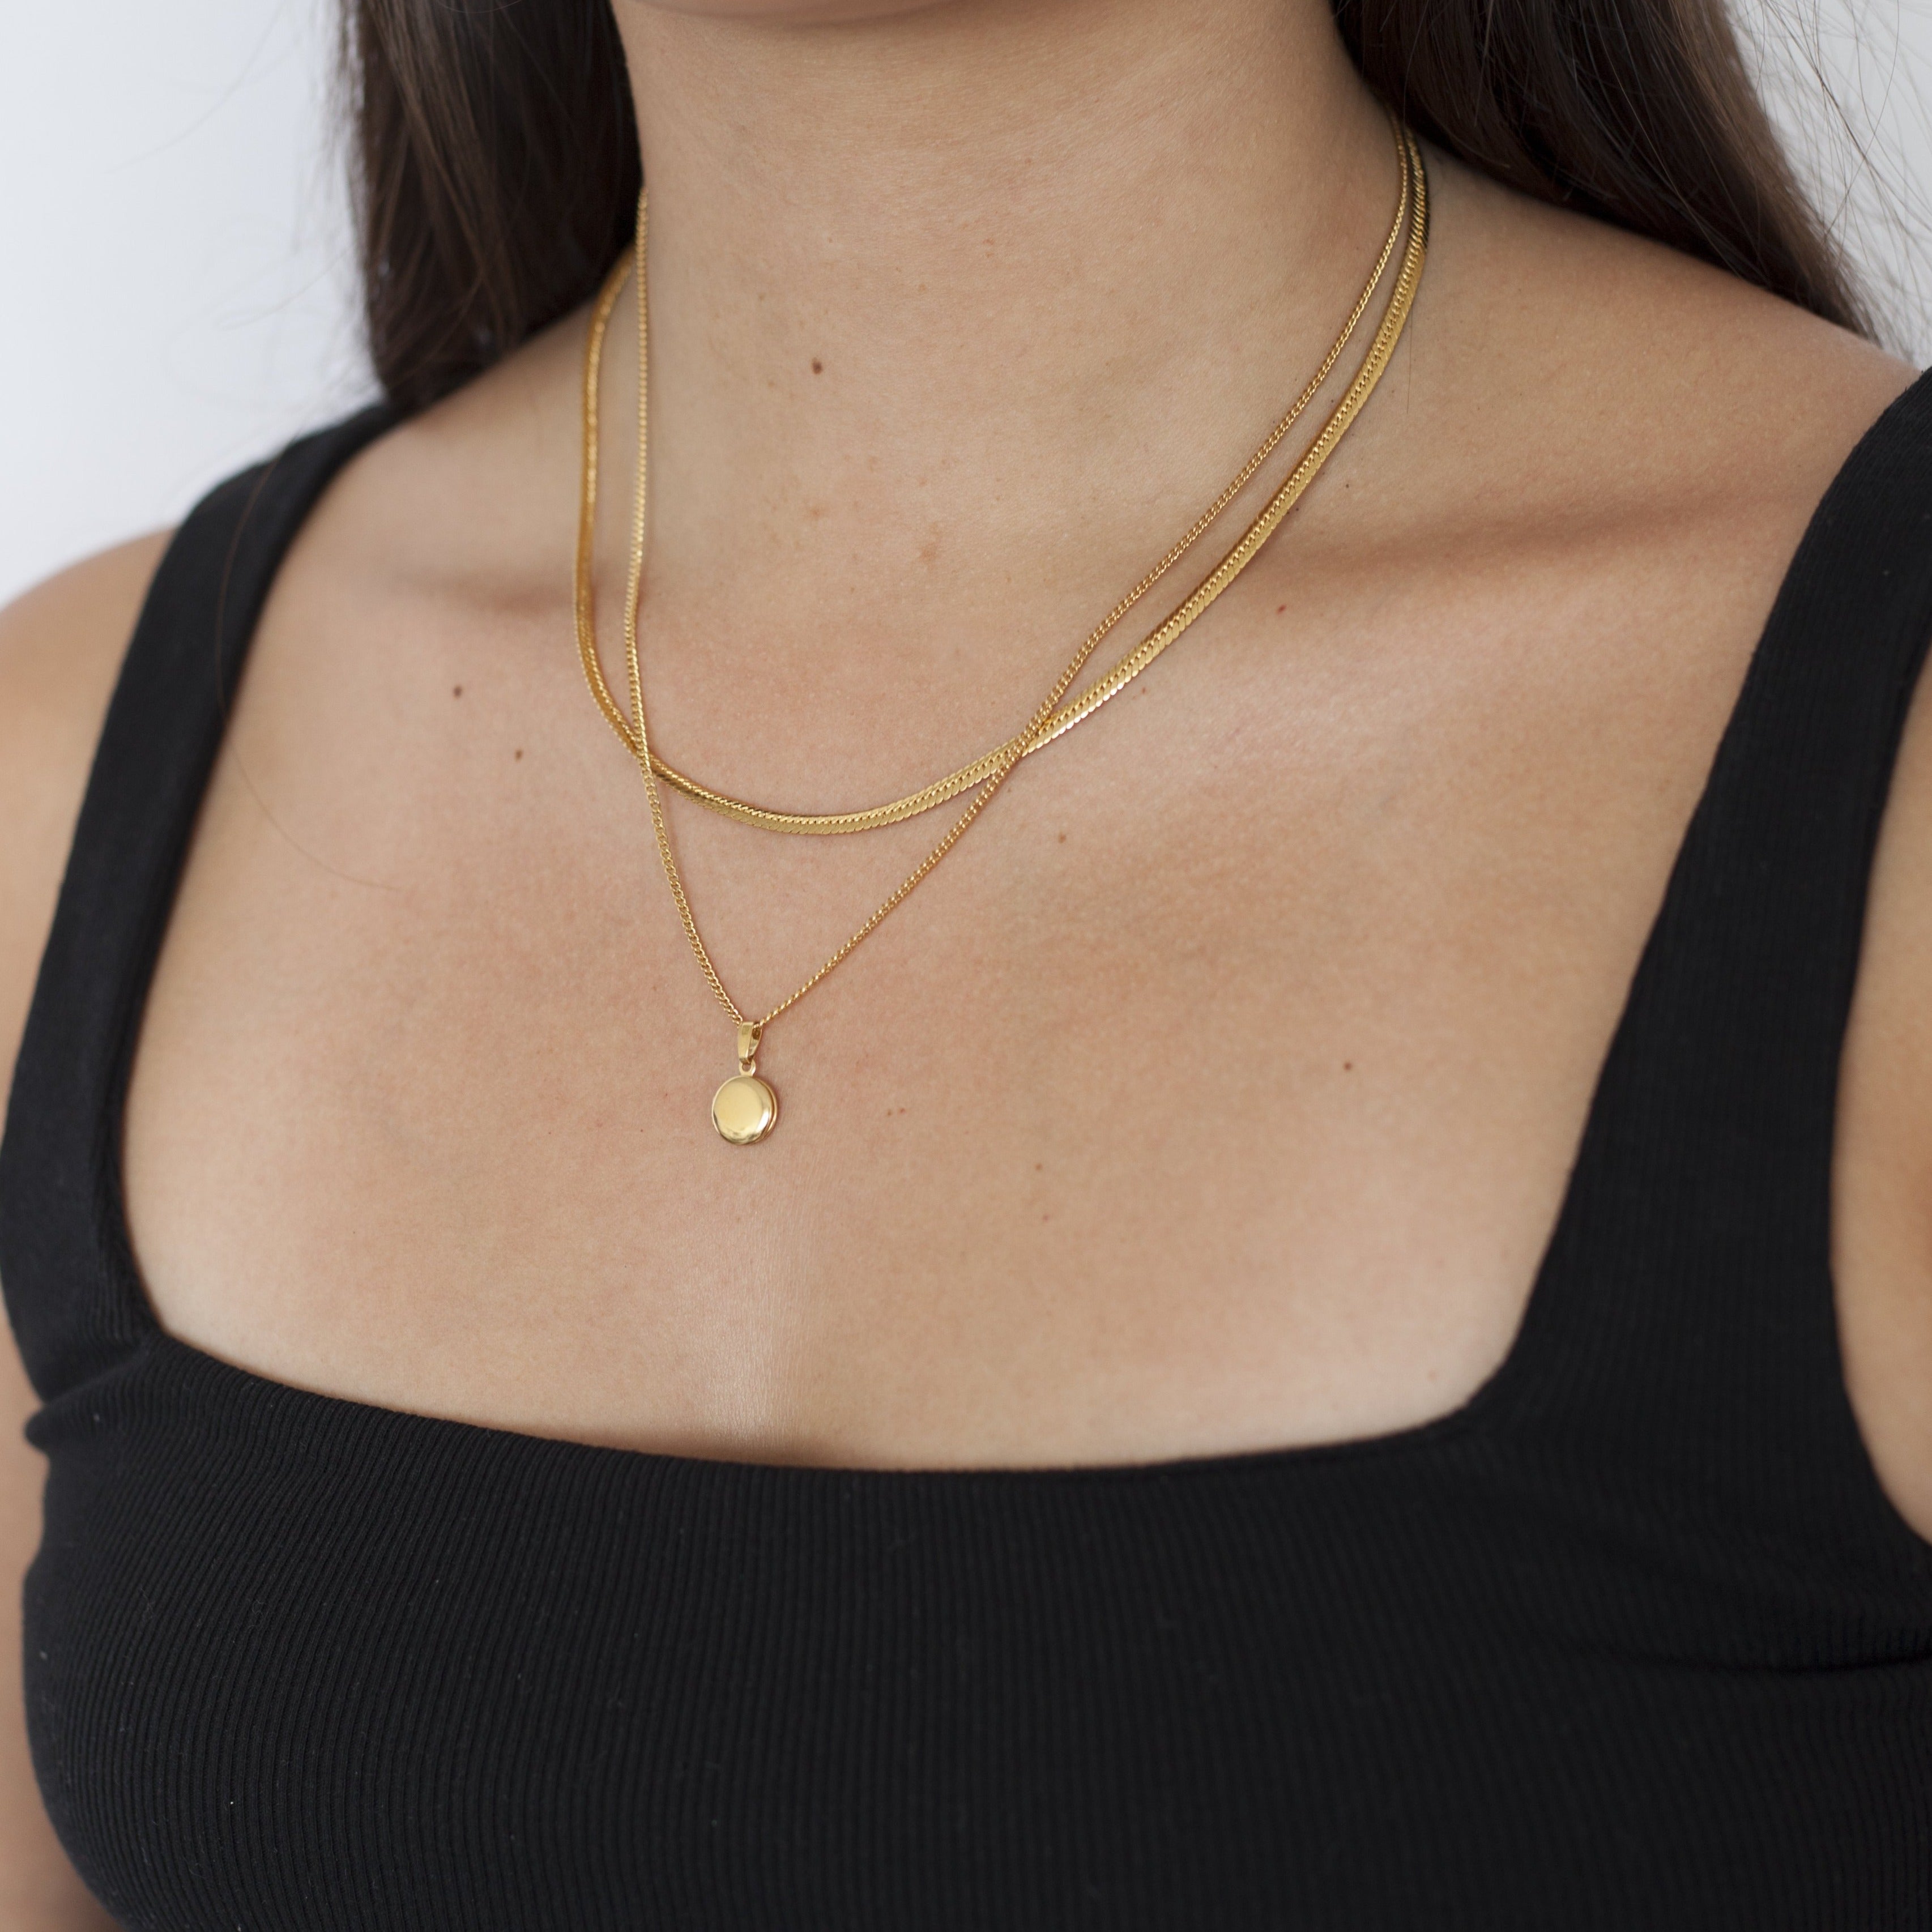 Thin Herringbone and Curb Chain with Locket Pendant gold